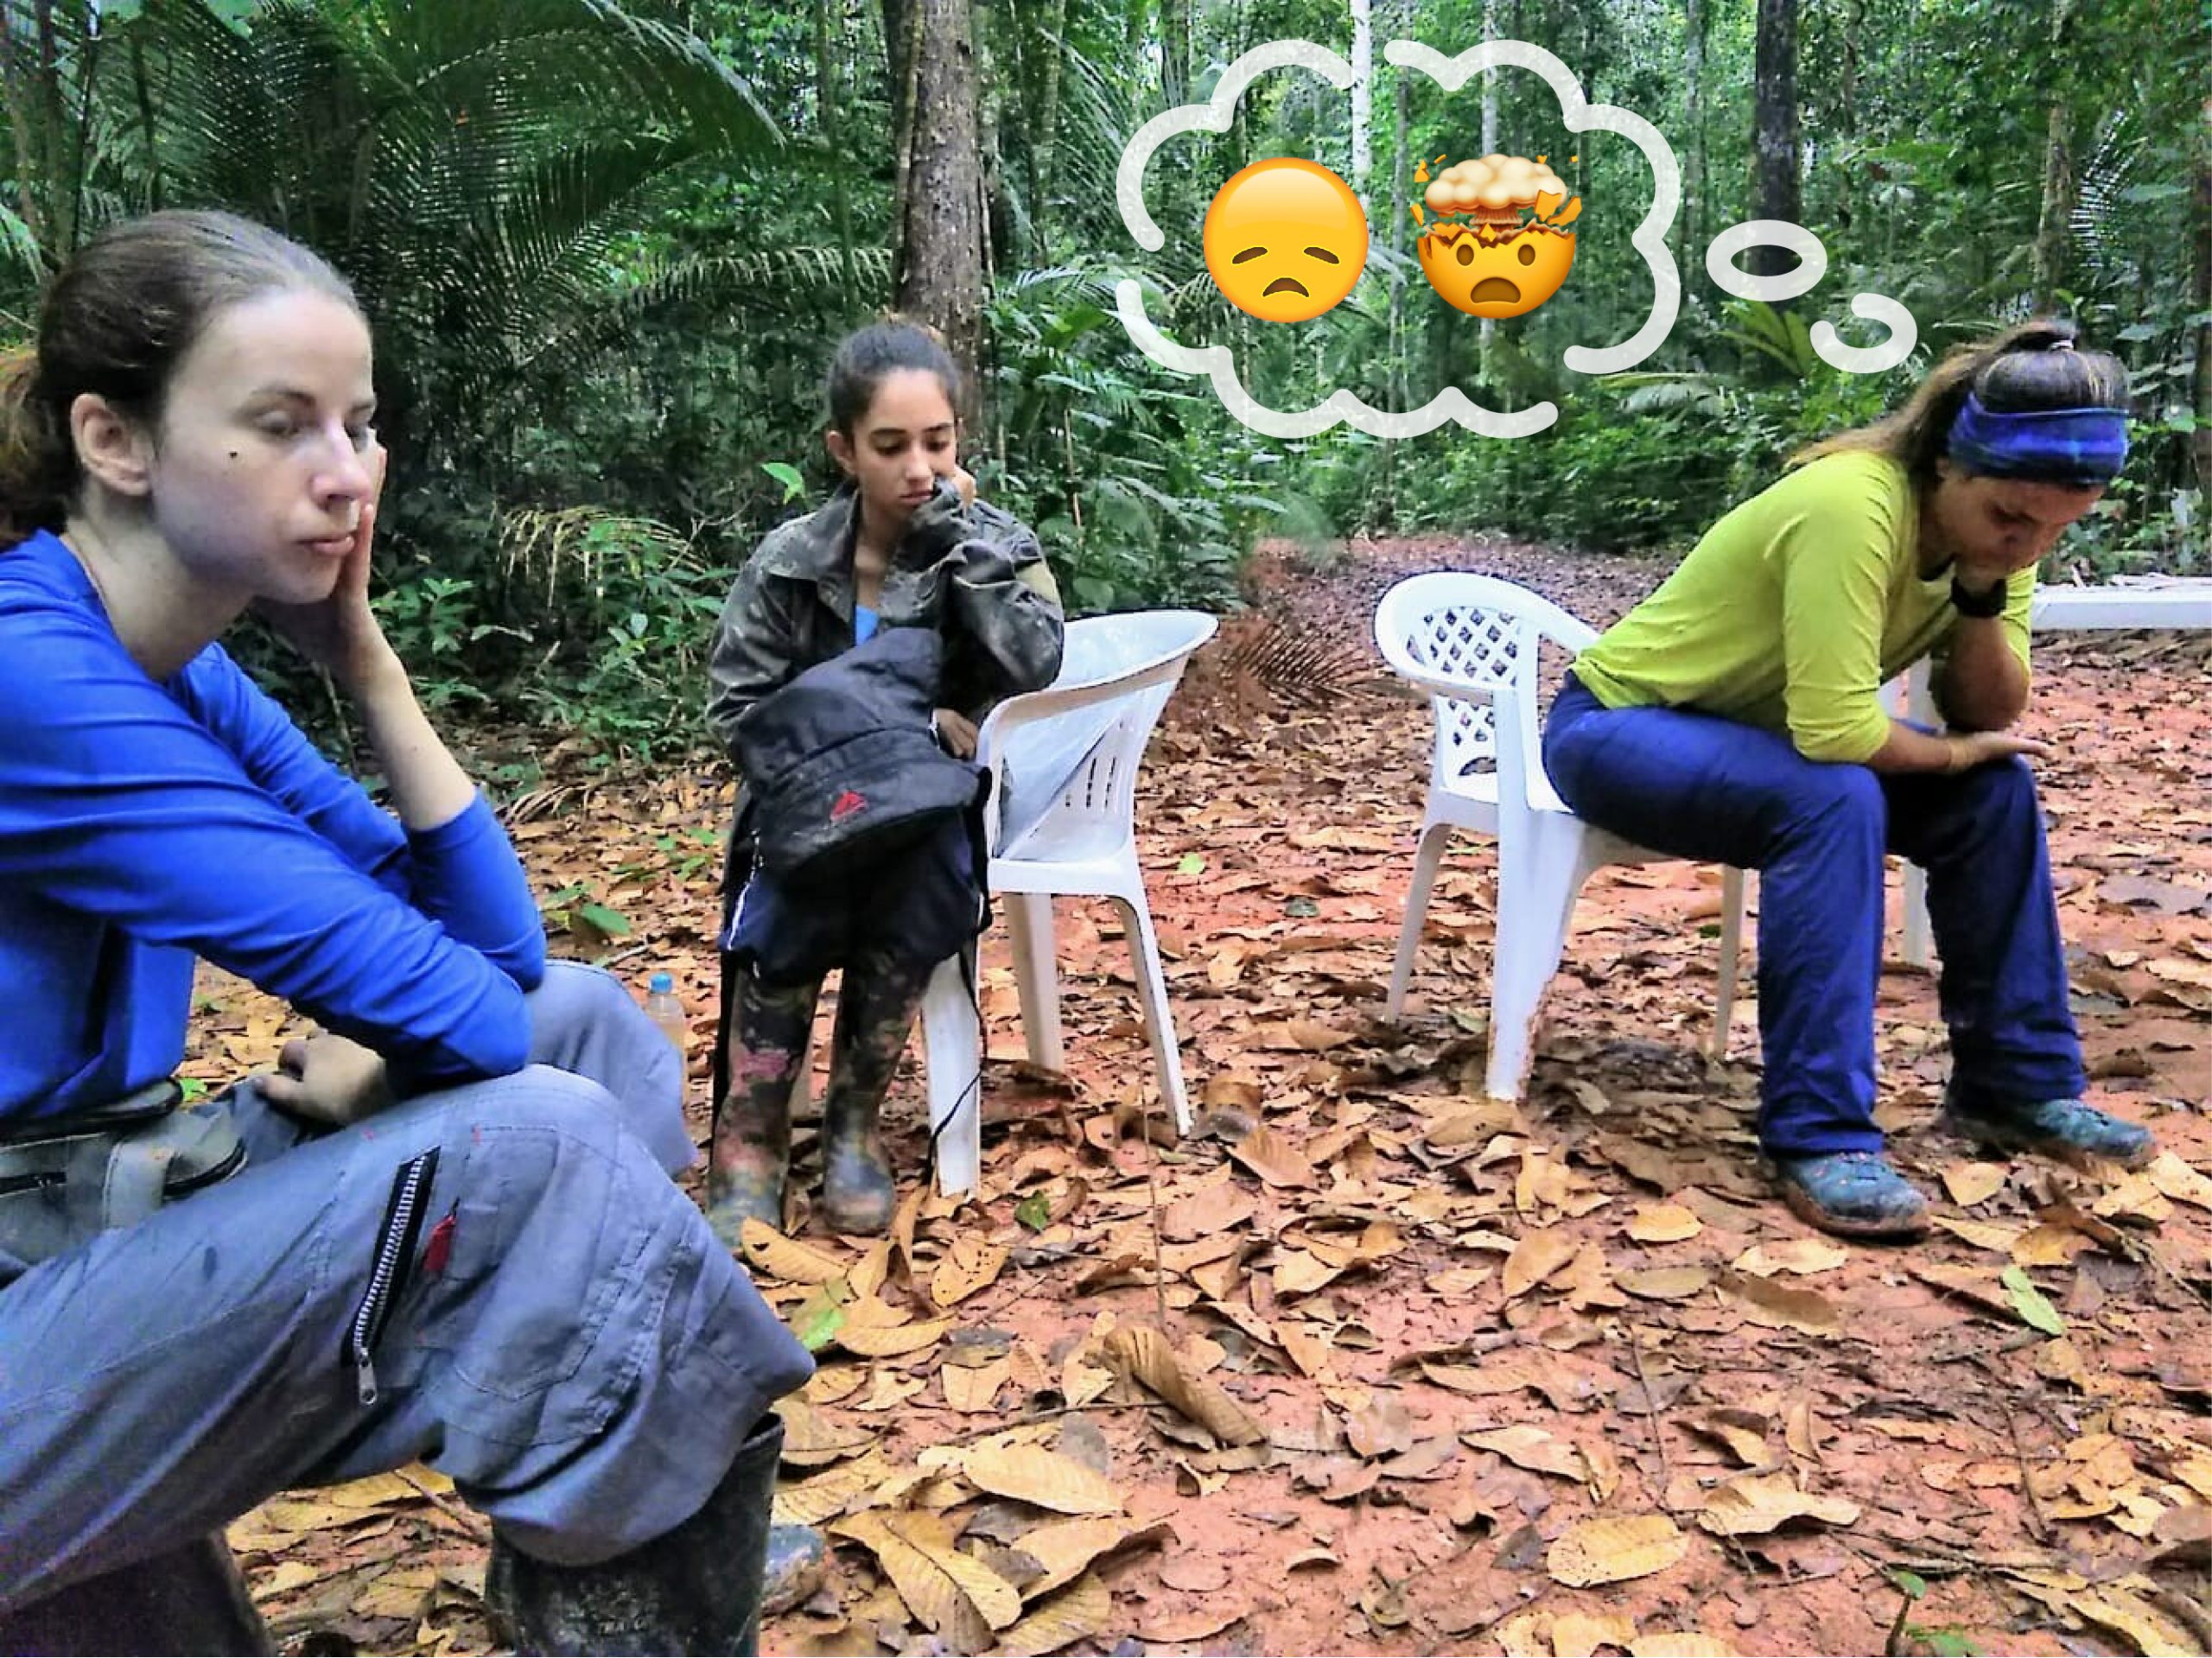 Eliane and two of her students sit in the forest, looking sad and frustrated, ponder how to fix the broken instrument.